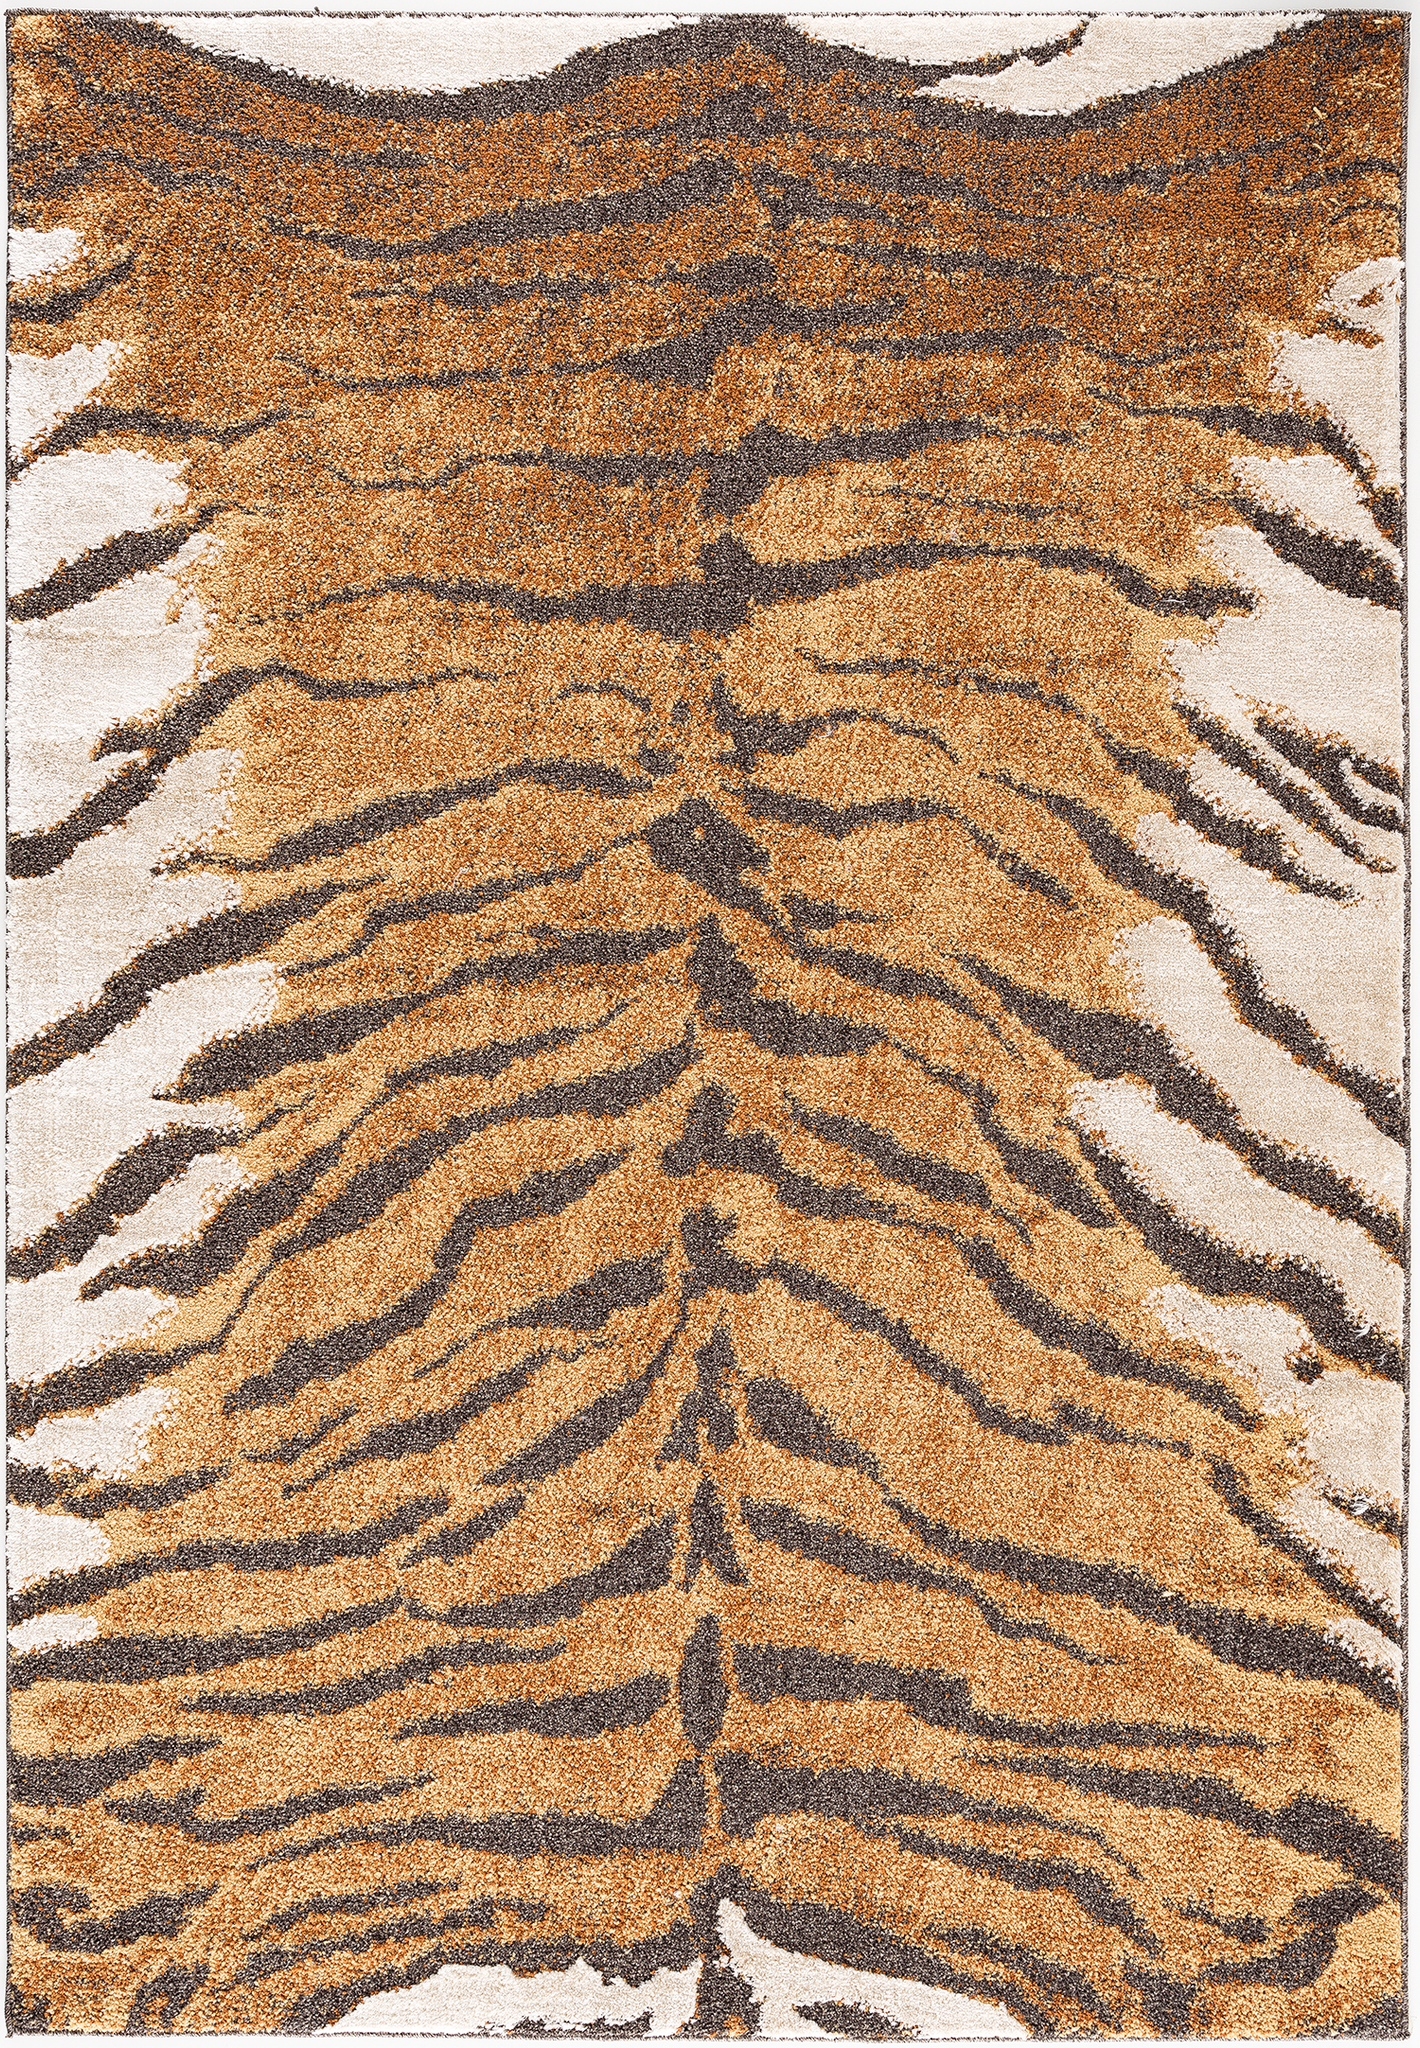 Area rug | Chennie Chic TIger |5x8 |3x8 Runner | By MotherRuggers.com | Machine Washable | Chenille Woven | Animal print | Burnt Orange | Dark Brown | Tan | Pet Friendly | Kid Friendly | Machine Wash | Line Dry | Living Room | Kitchen | Bedroom | Moderate Traffic | High Traffic mat recommended | Three-year warranty with proper care | Shake or light Vacuum | Machine Wash as needed | Dry Flat or Line Dry | Dries fast